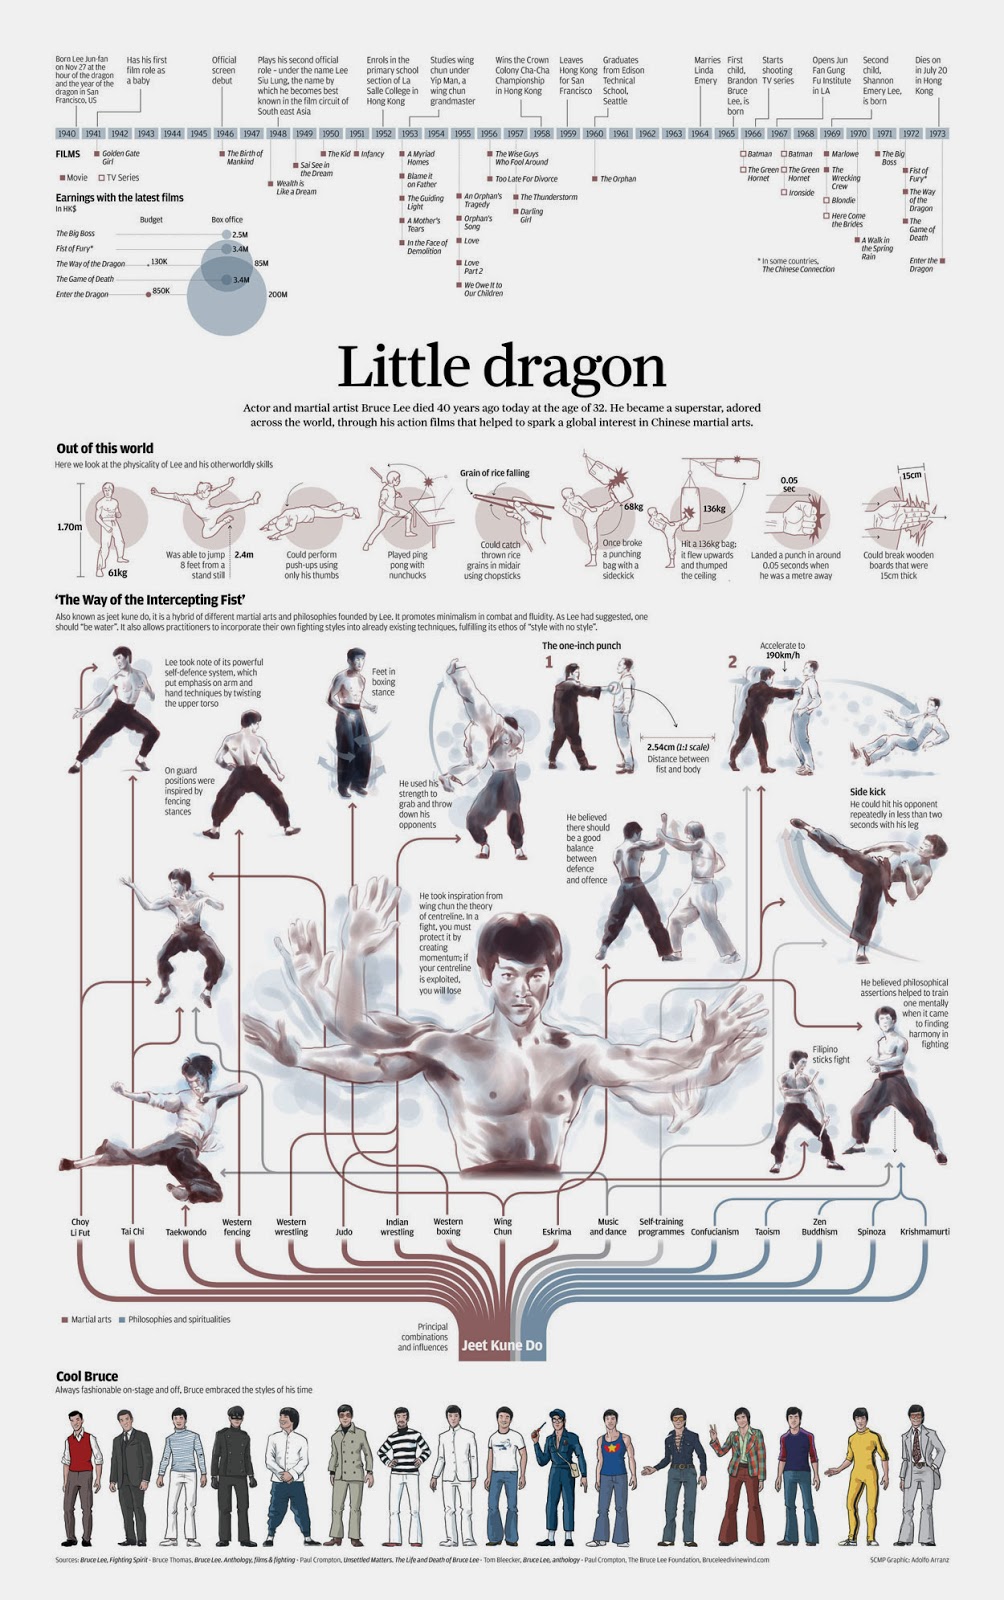 http://www.scmp.com/infographics/article/1286902/bruce-lees-best-moves